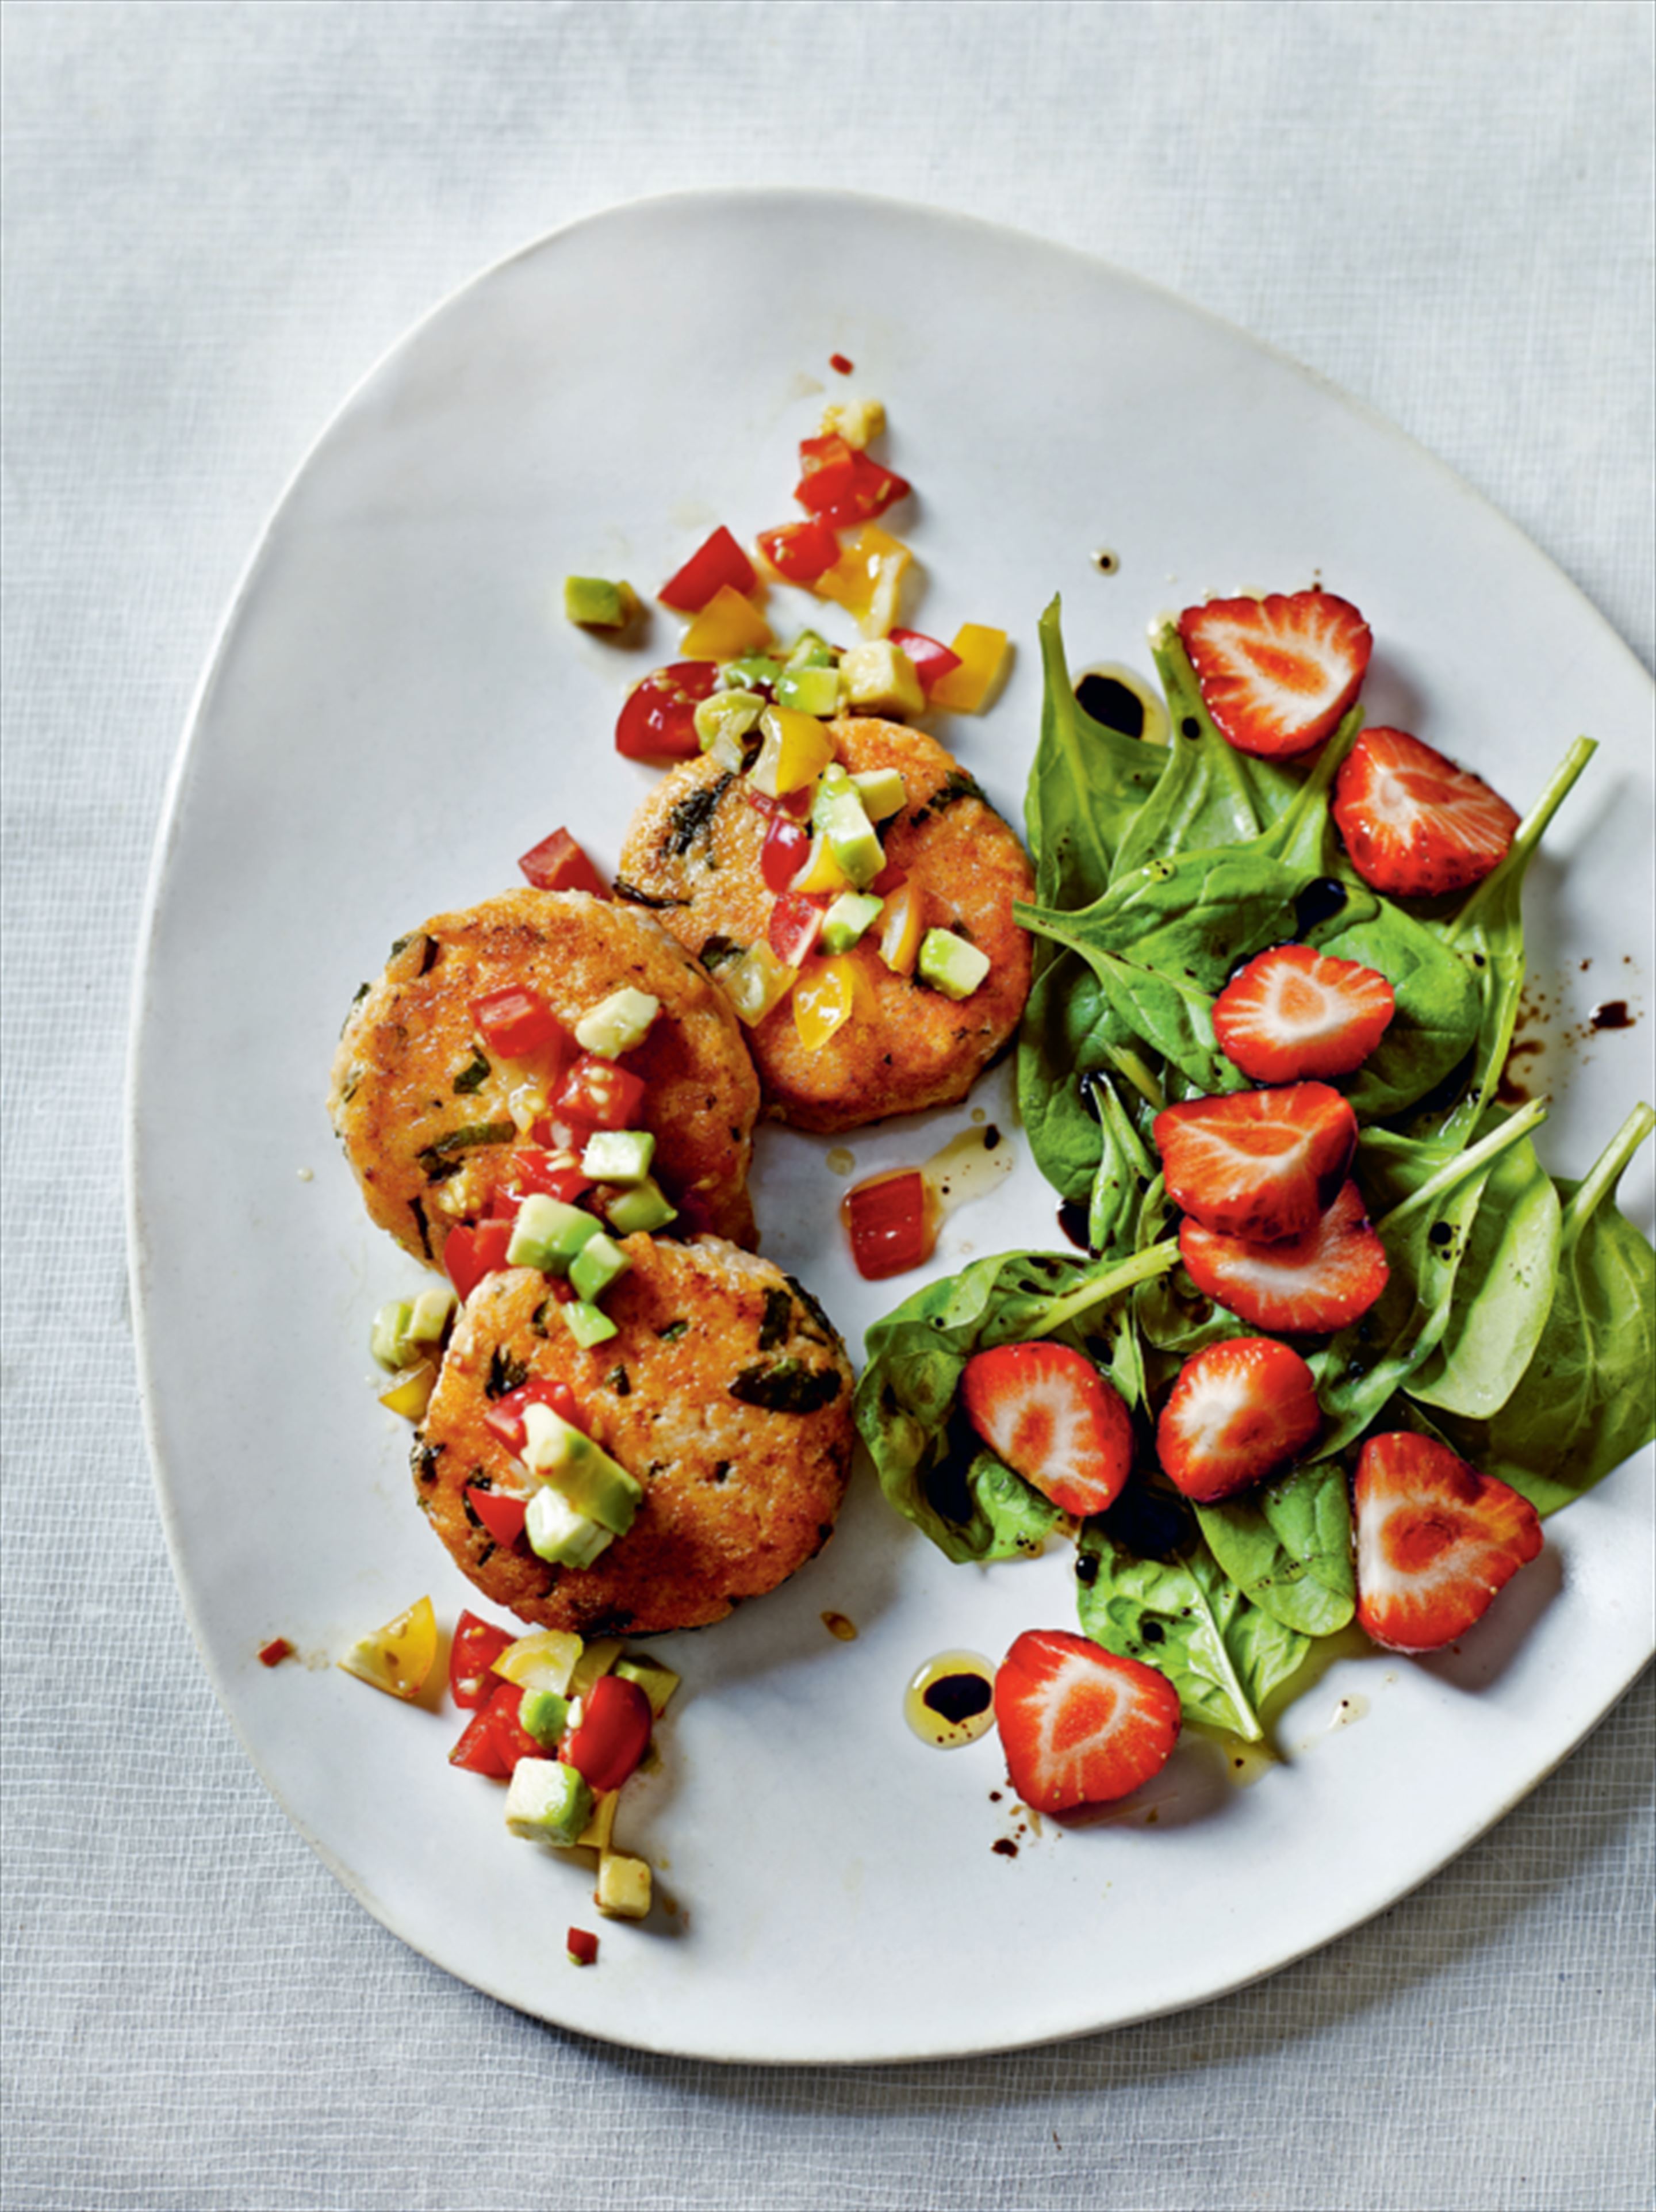 Herbed salmon burgers with avocado salsa and spinach-strawberry balsamic salad